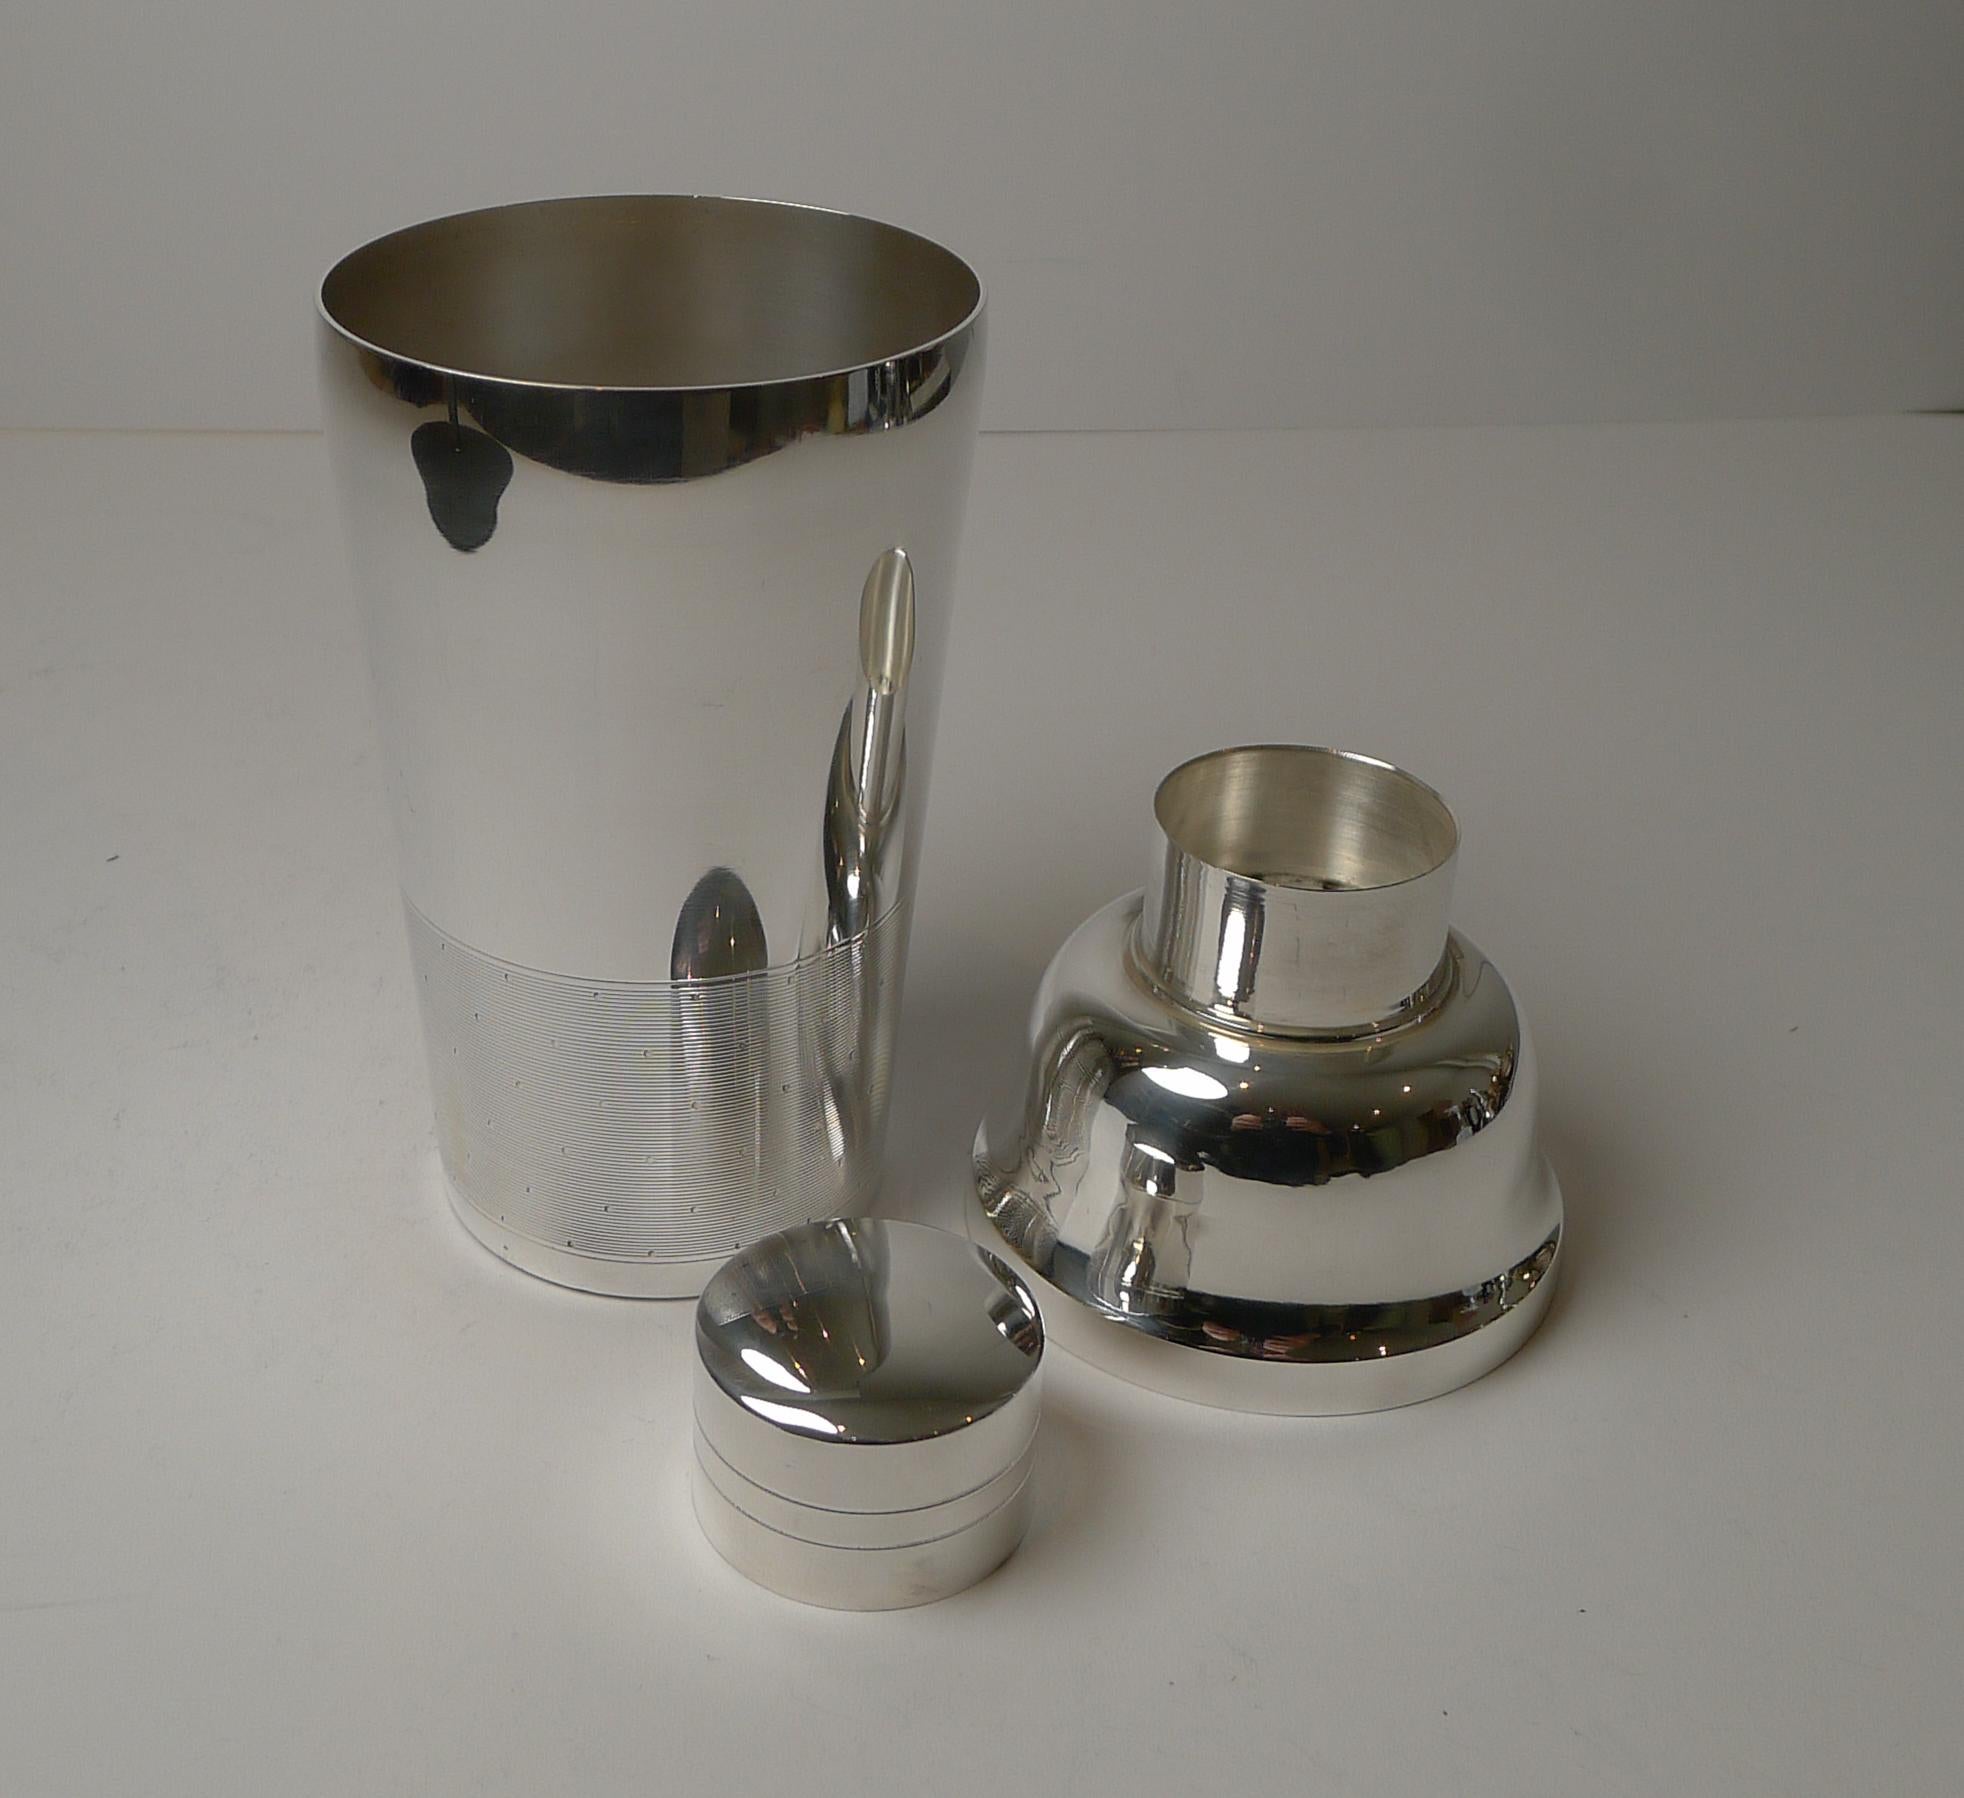 Mid-20th Century French Art Deco Silver Plated Cocktail Shaker, c.1930